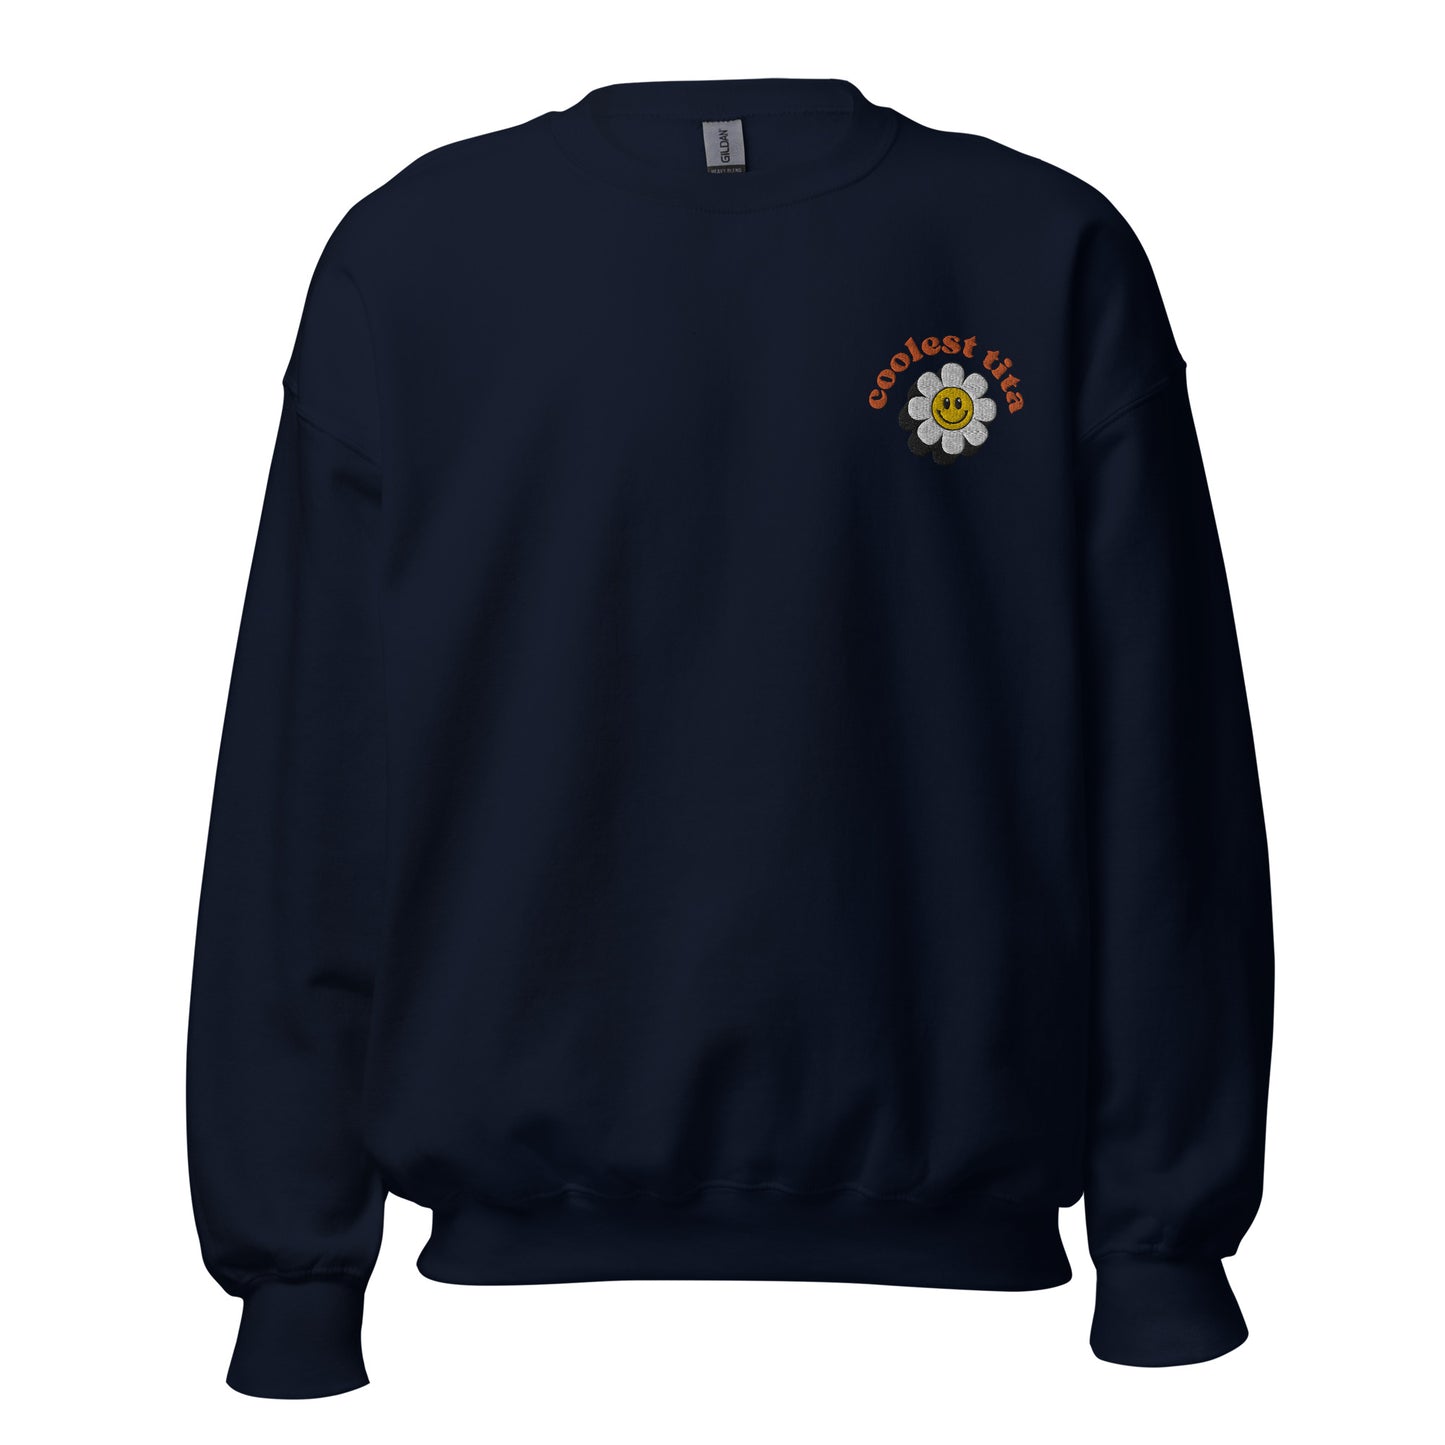 Filipino Sweatshirt Coolest Tita Smiley Embroidered Crew Neck in color variant Navy